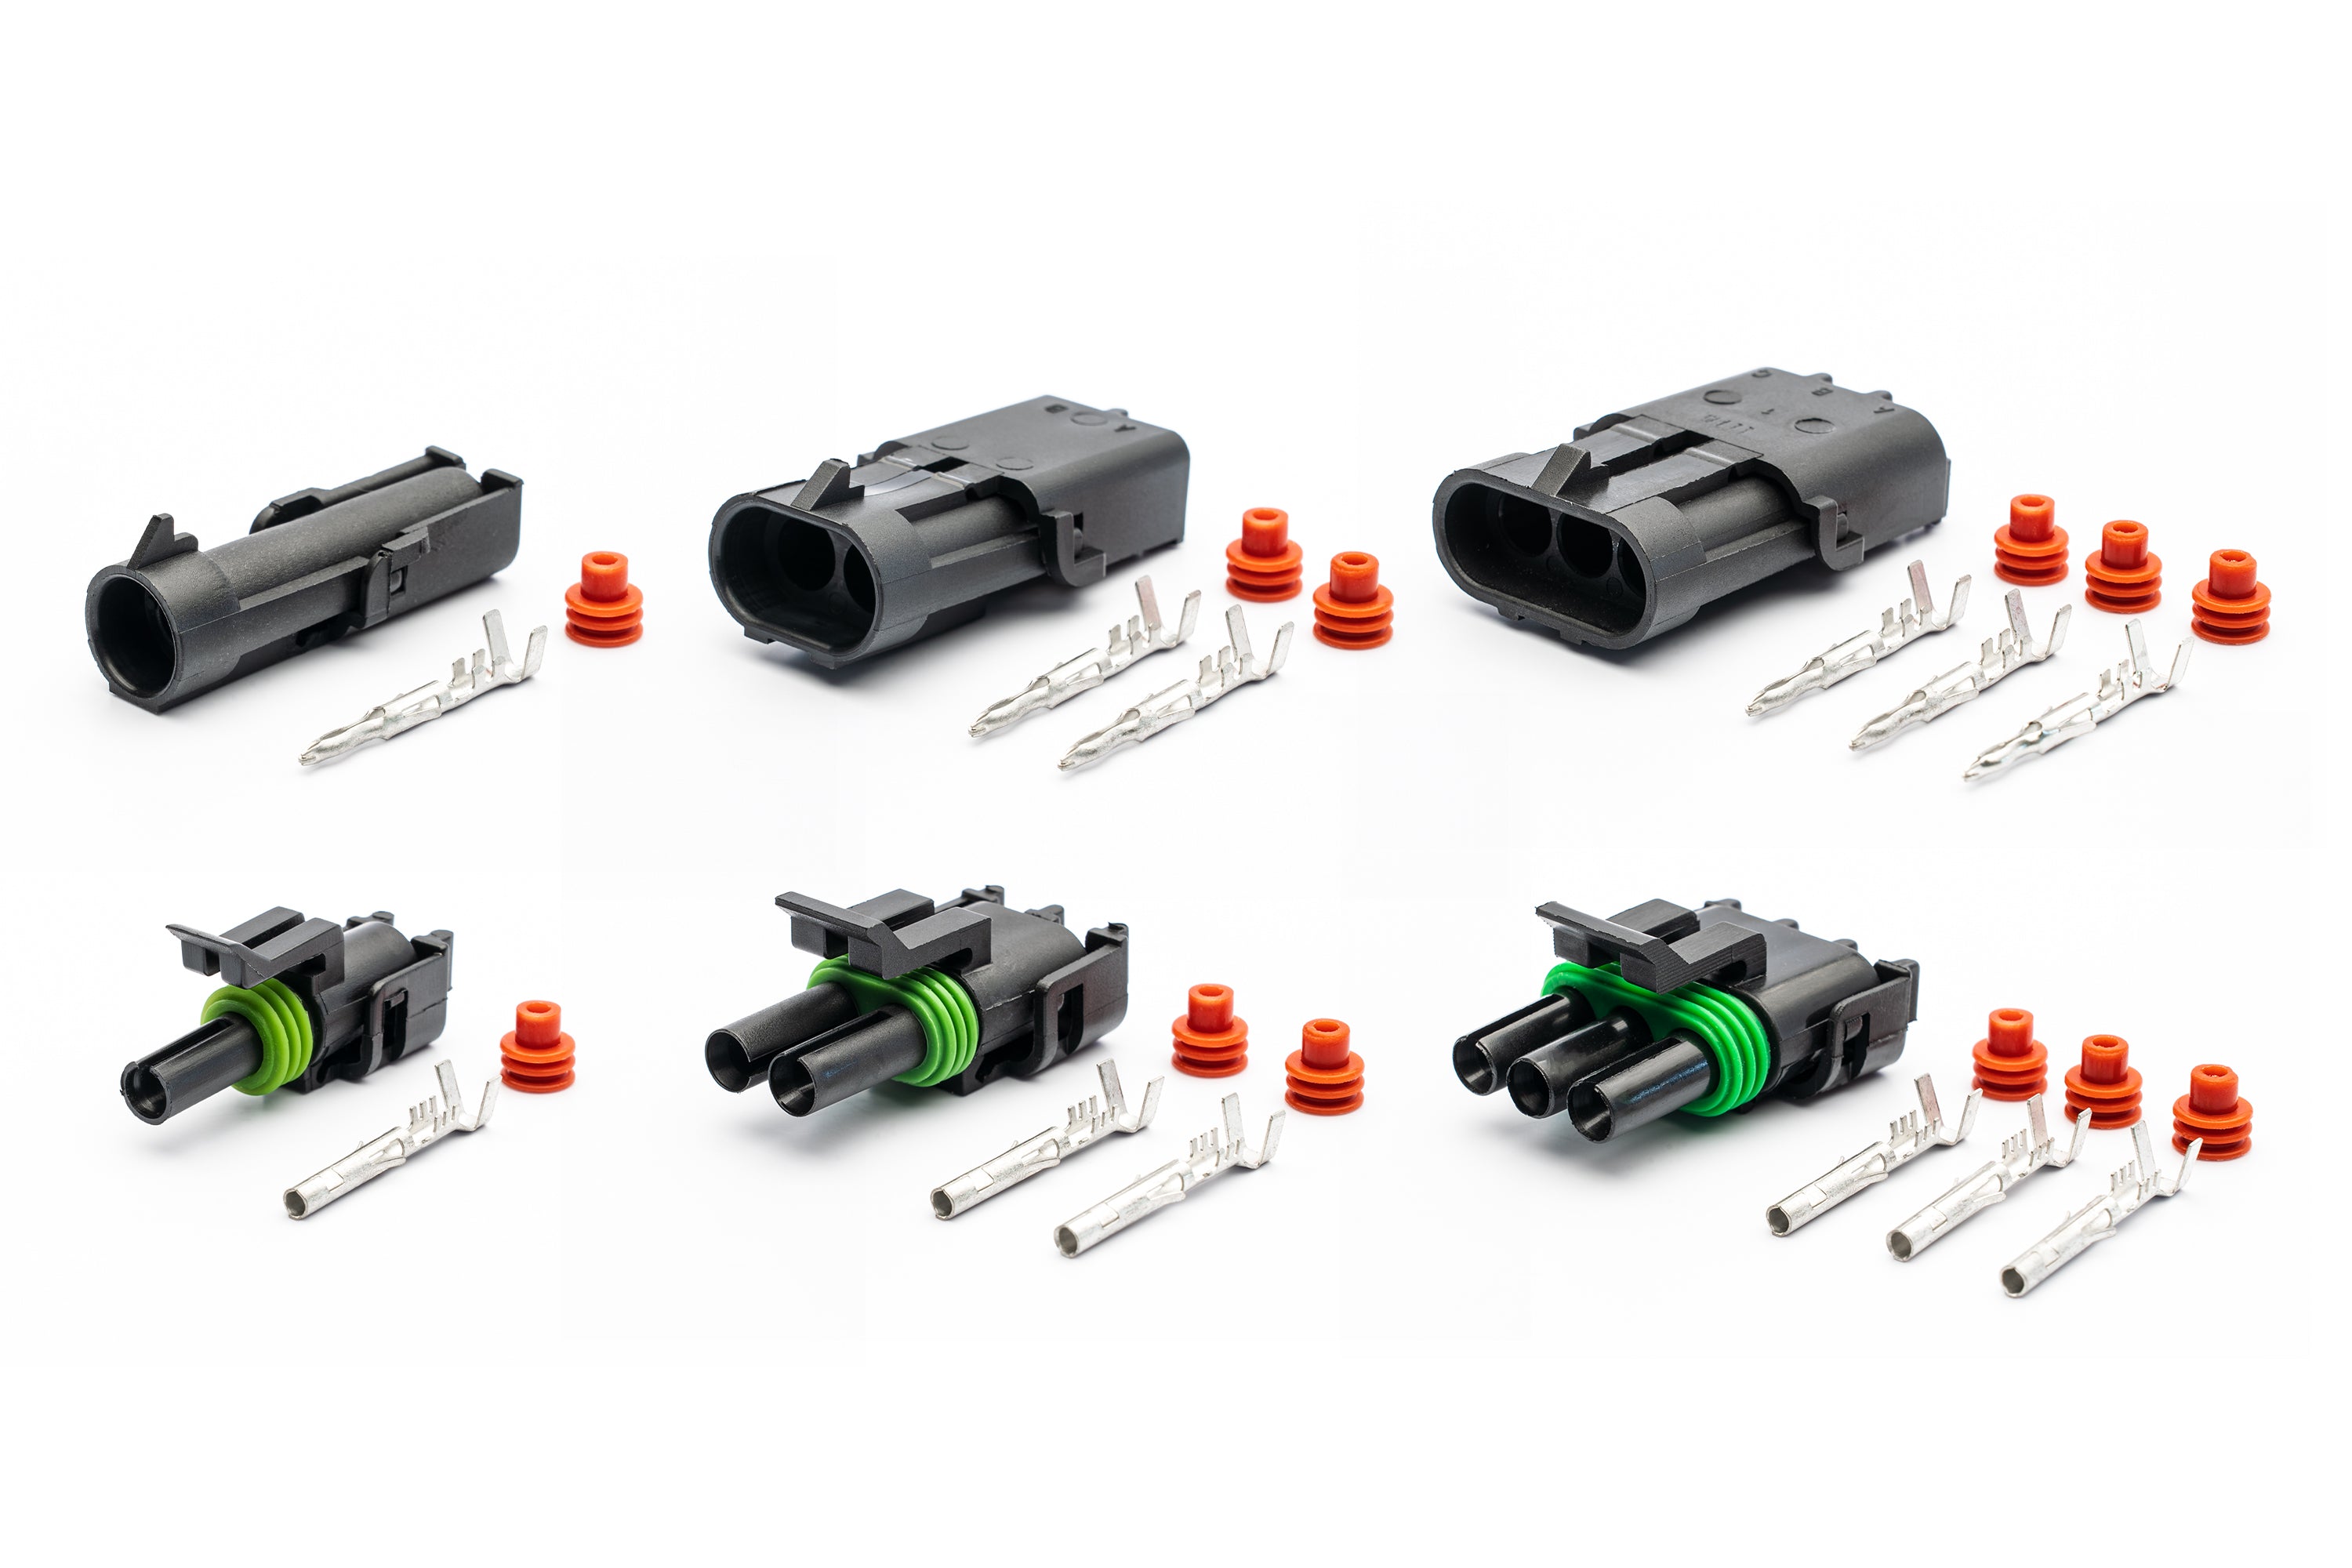 SPV Parts Weather Pack Connector Kits - Use with SPV Parts Harness System or Switch Wires (Sold in Singles)